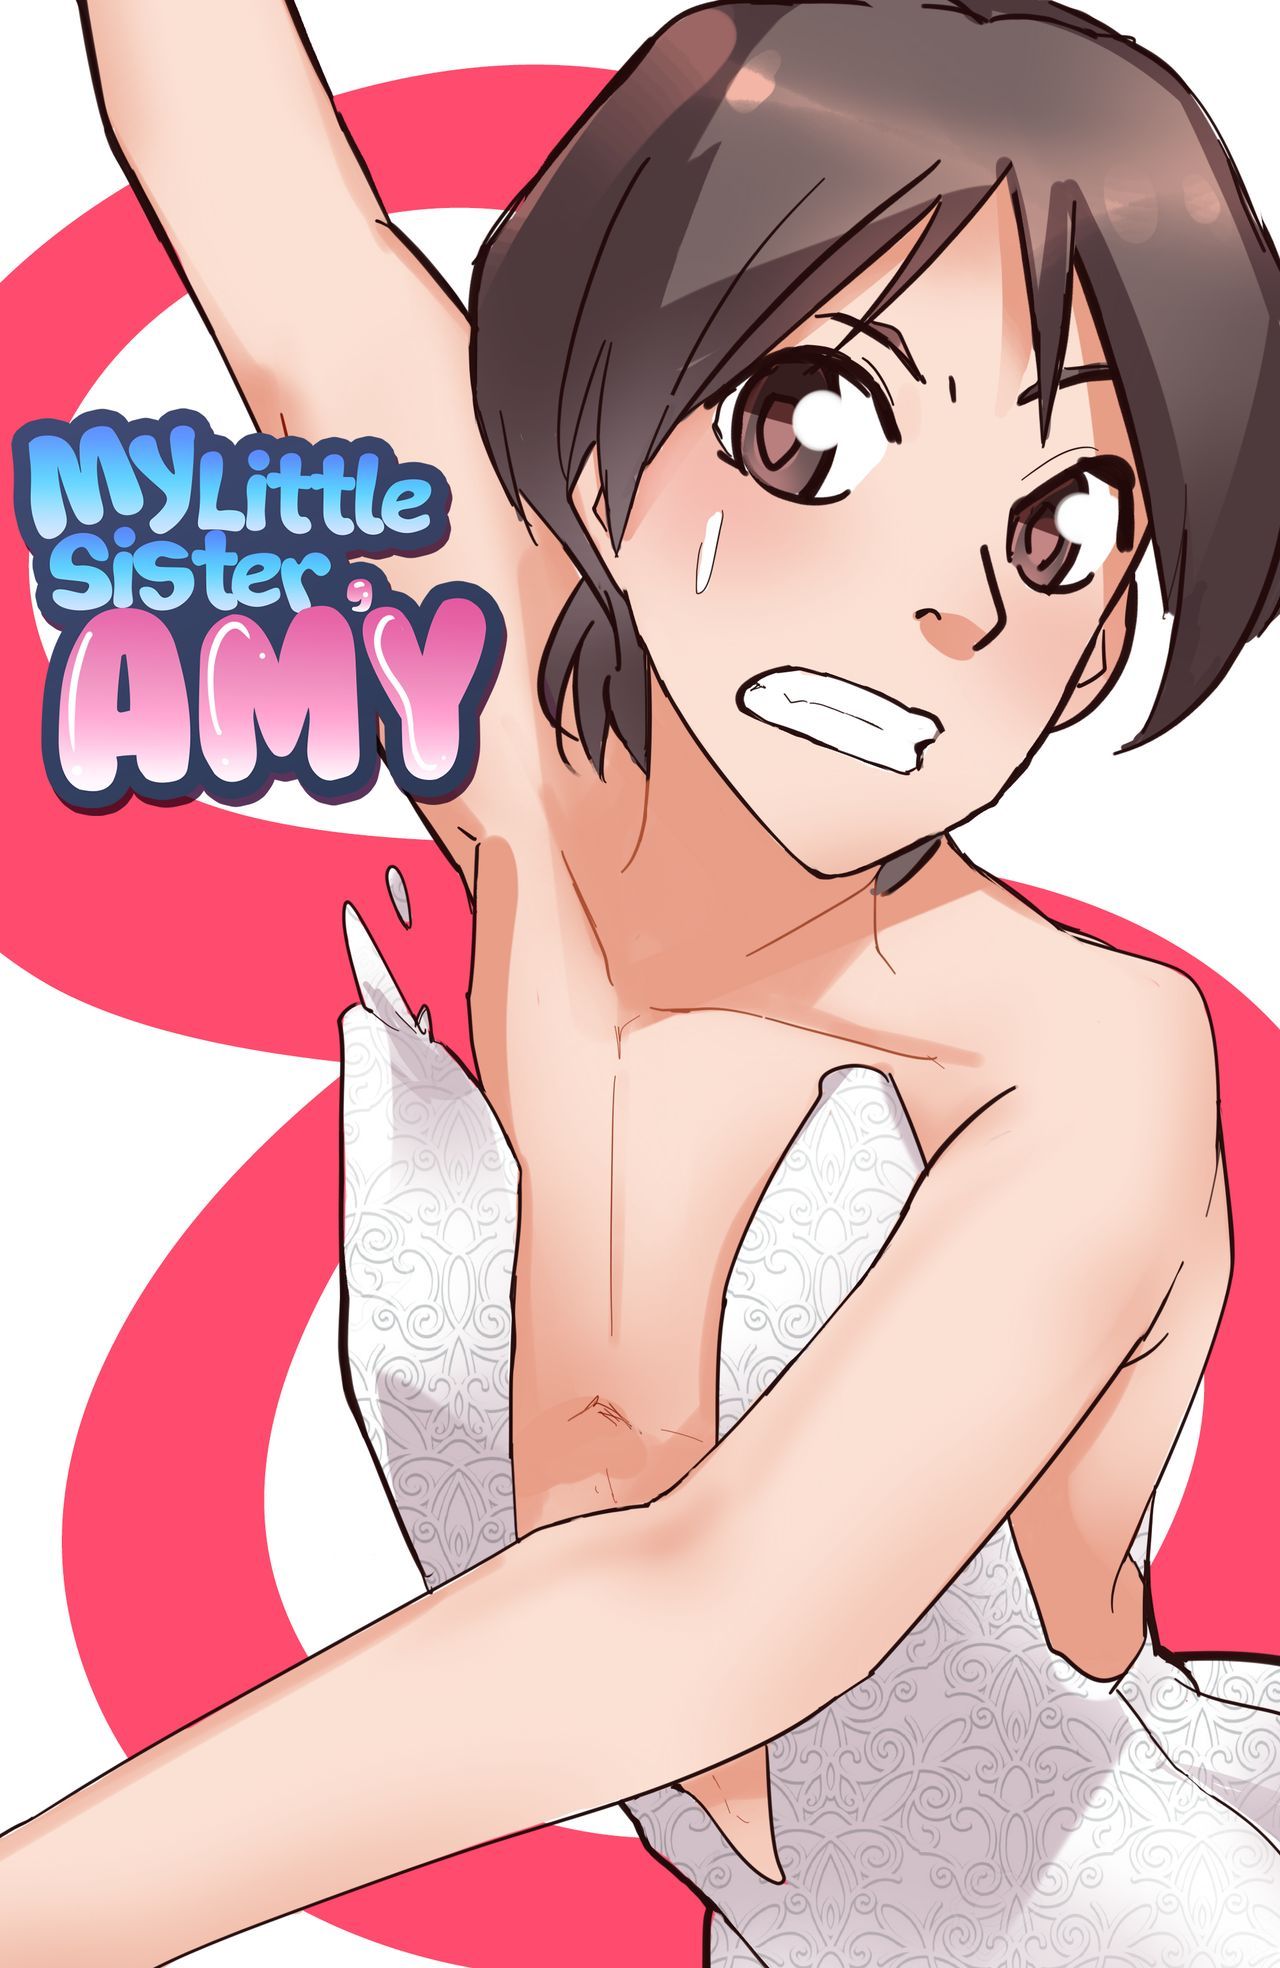 [MeowWithMe] My Little Sister Amy - Part 8 (on-going) 1